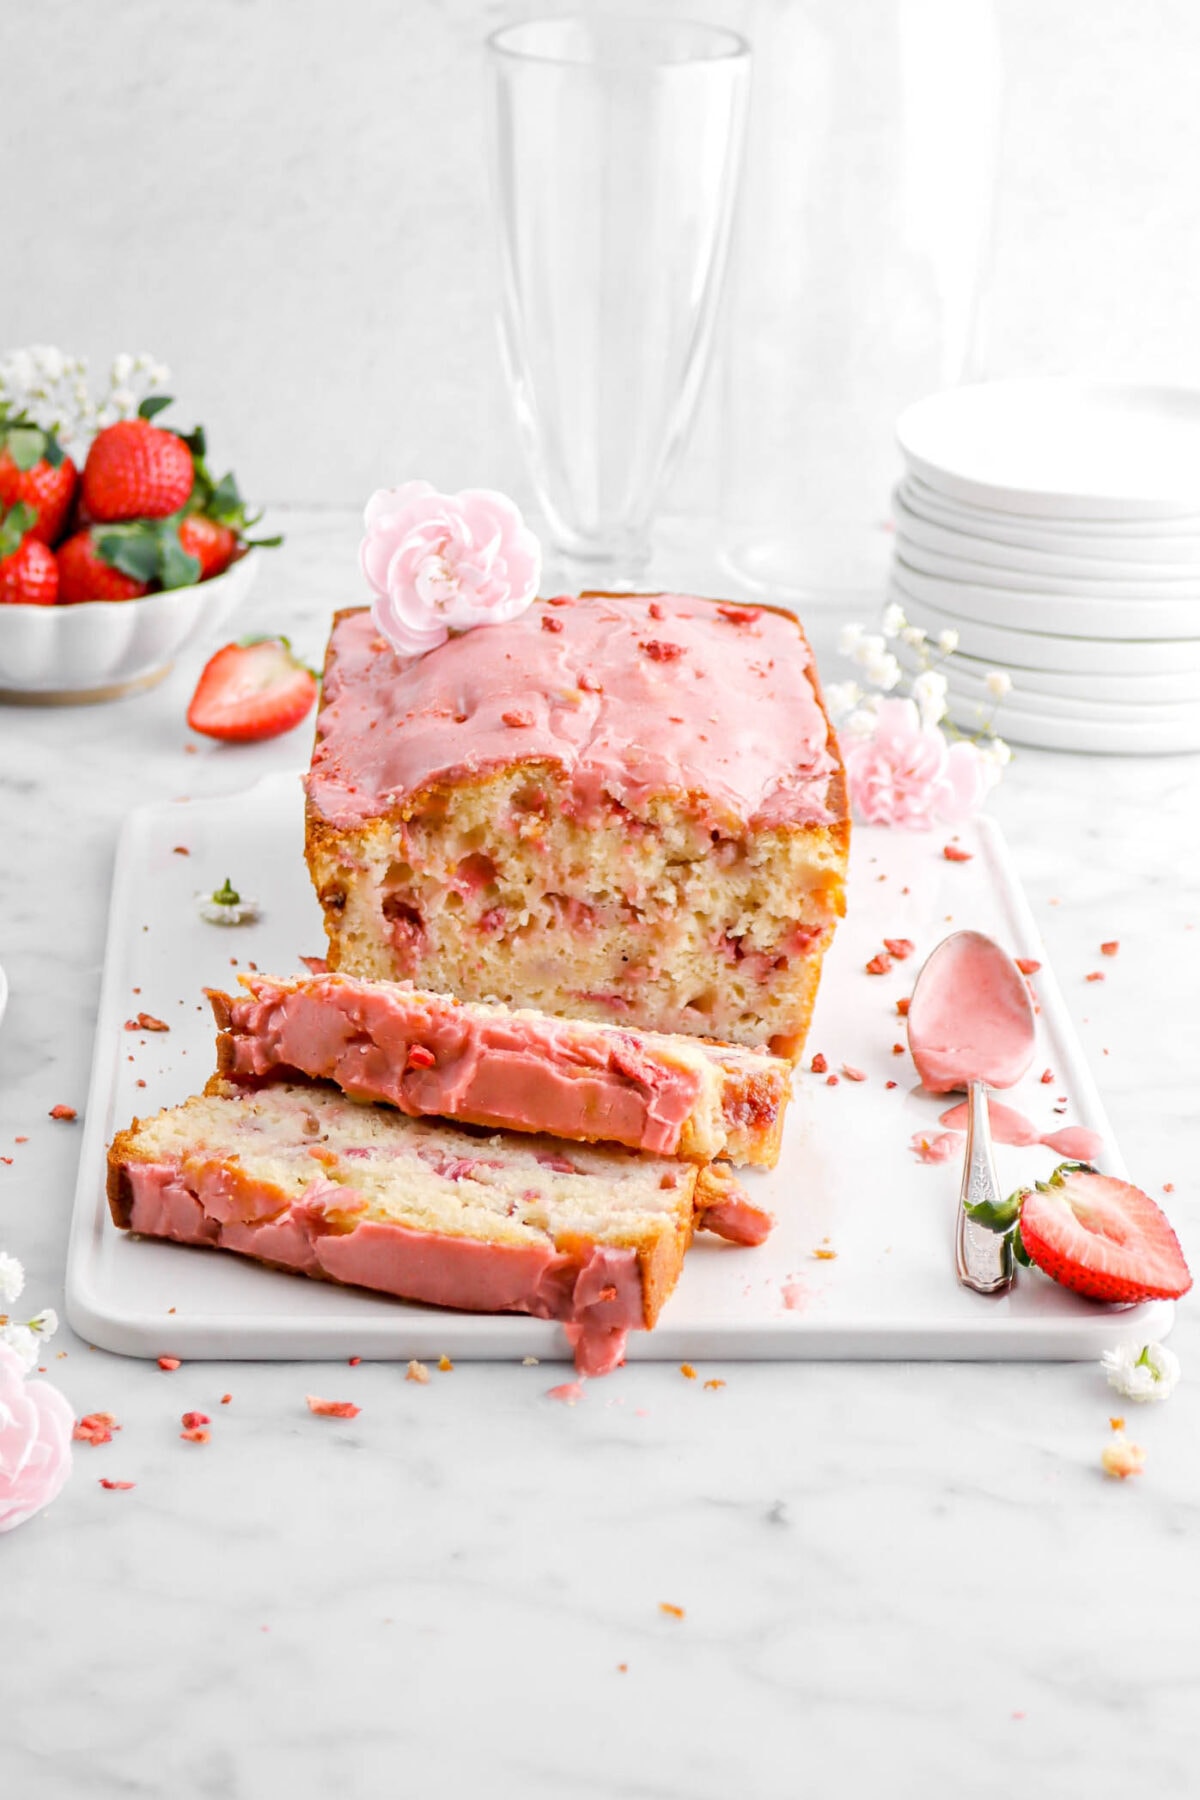 strawberry bread with strawberry icing and pink carnation on top, two slicing laying in front on white tray with fresh strawberries around on marble surface.